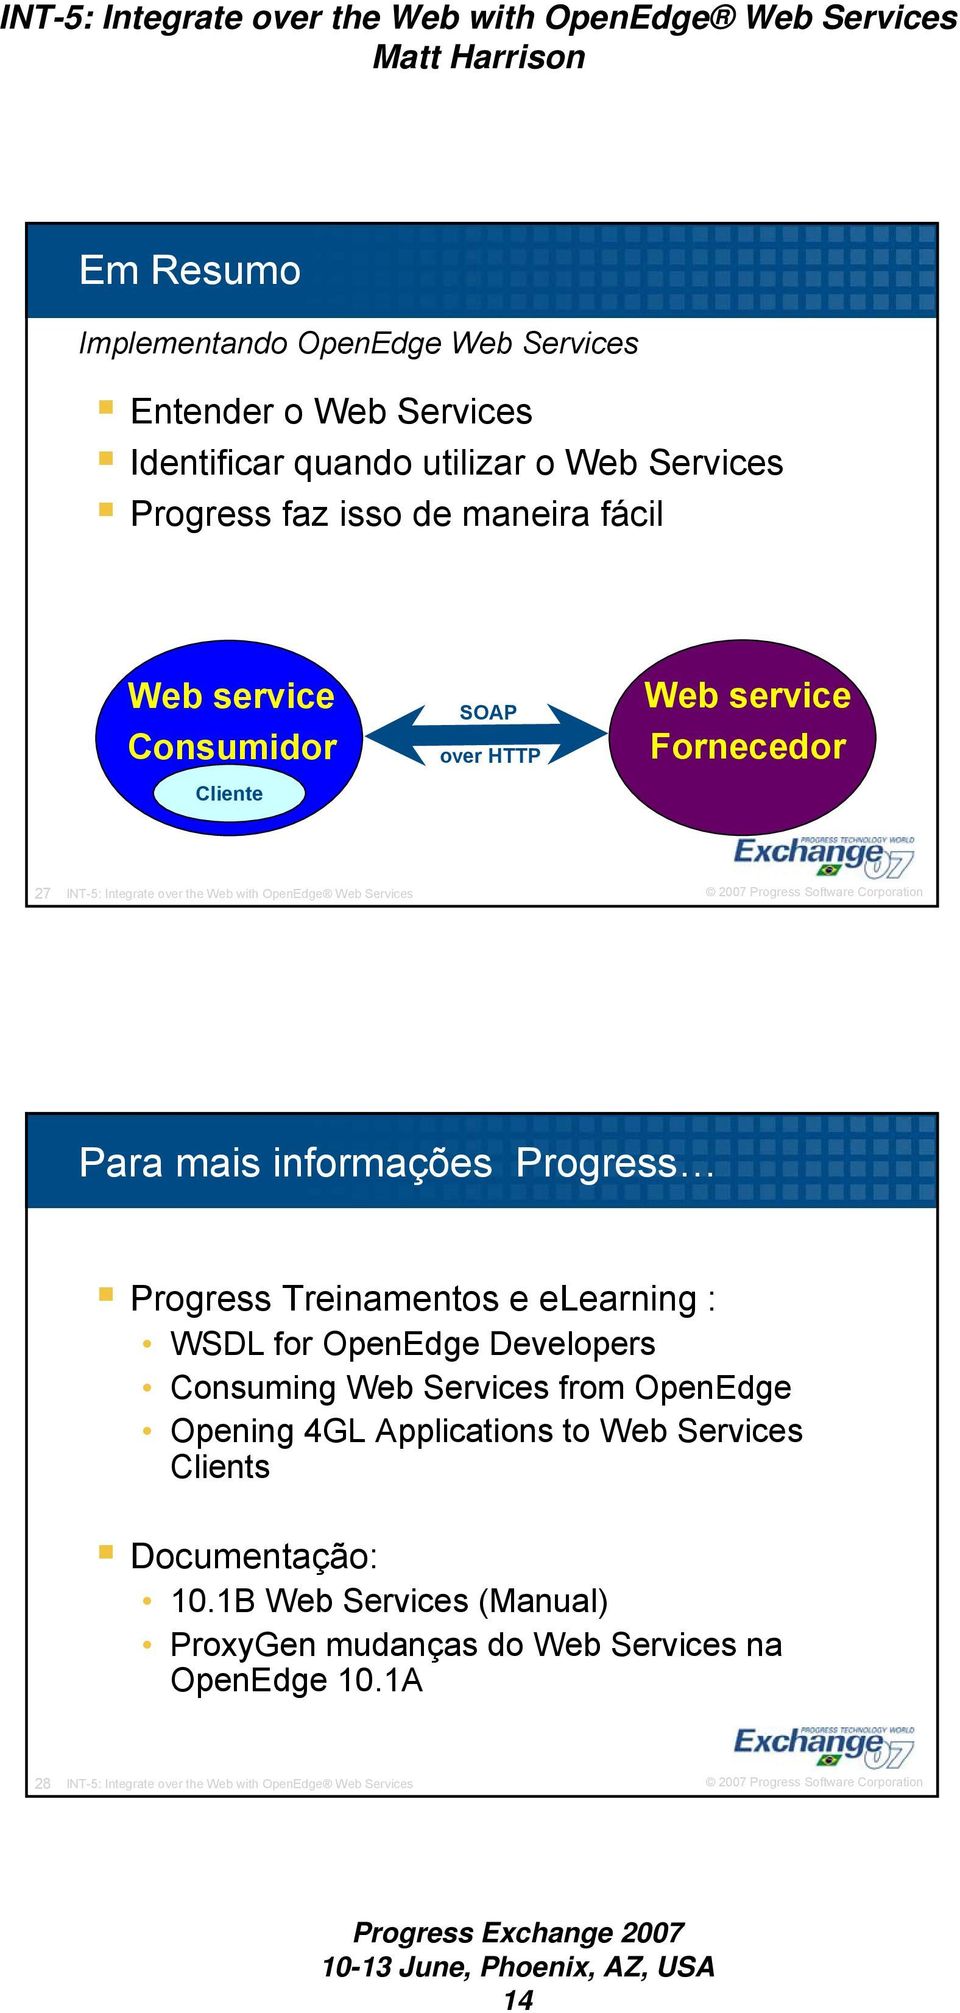 Progress Progress Treinamentos e elearning : WSDL for OpenEdge Developers Consuming Web Services from OpenEdge Opening 4GL Applications to Web Services